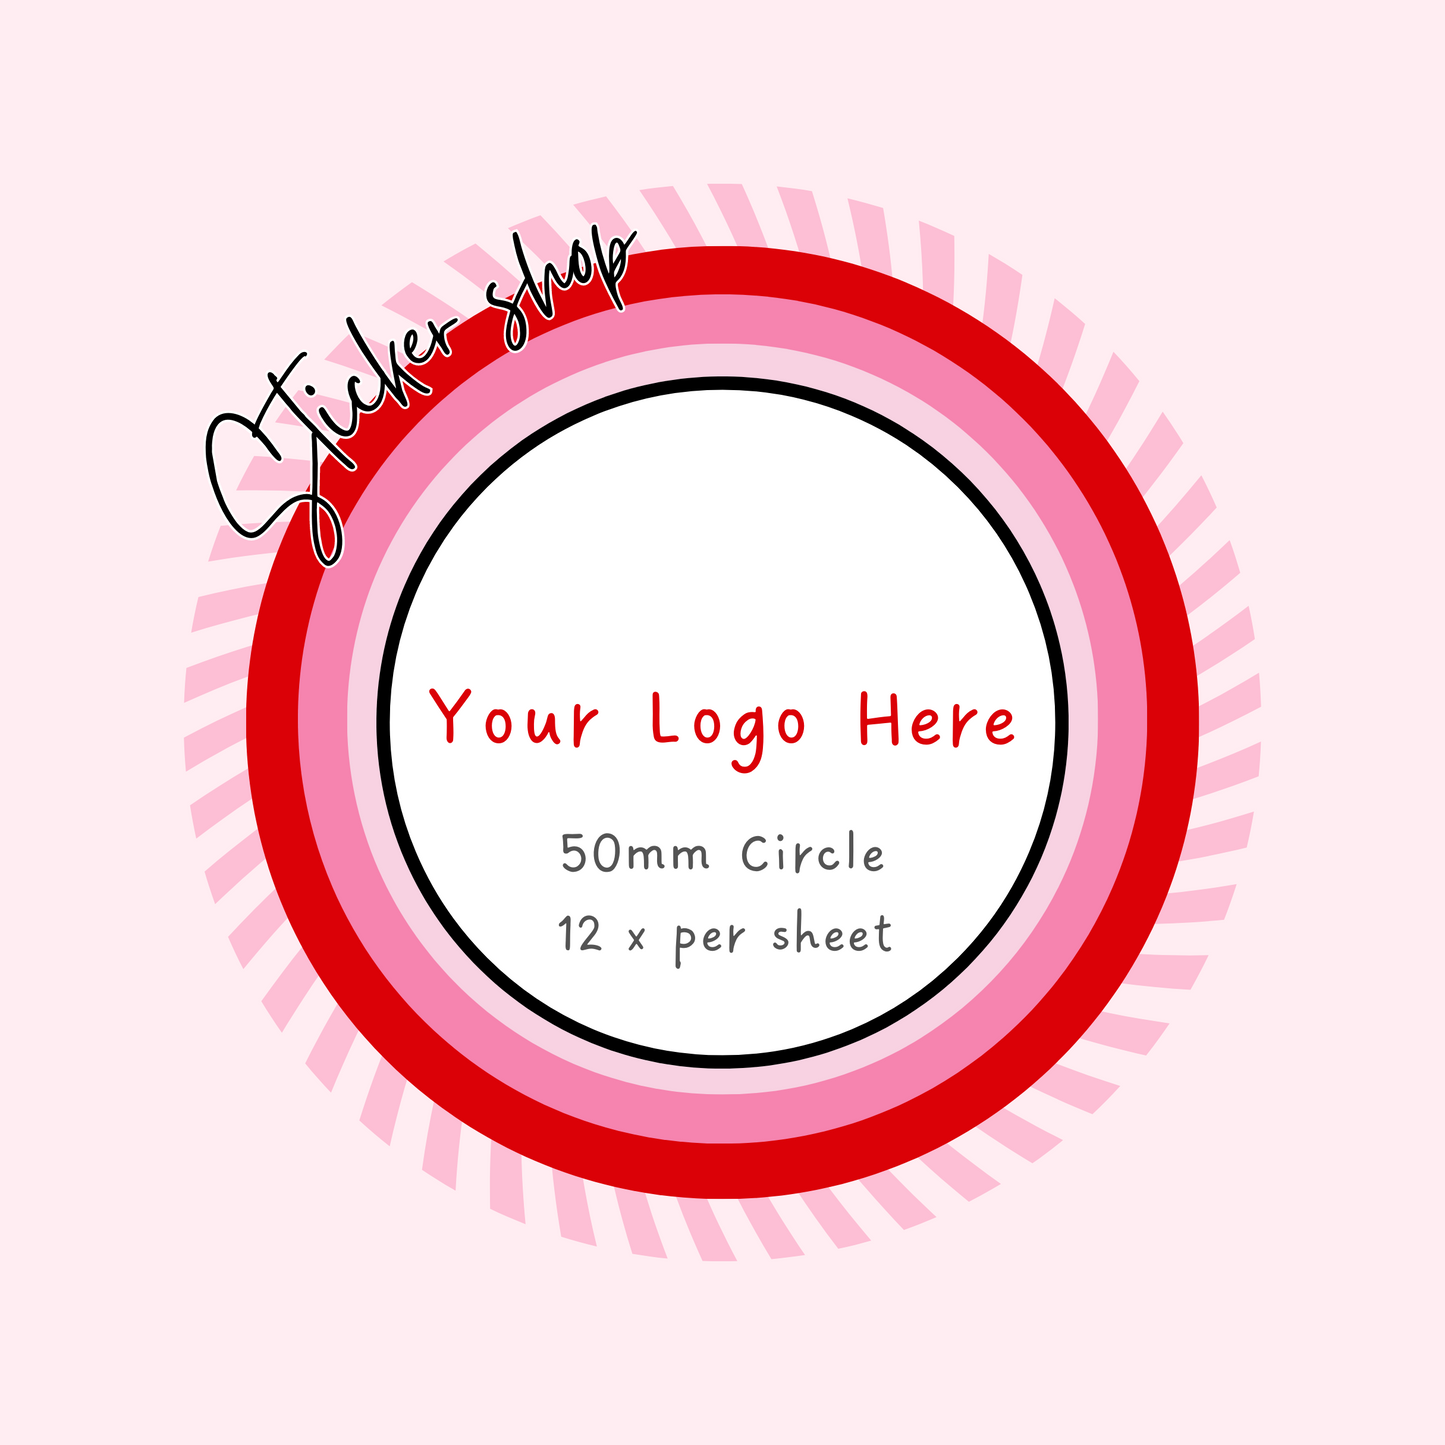 5cm Circle Personalised Stickers